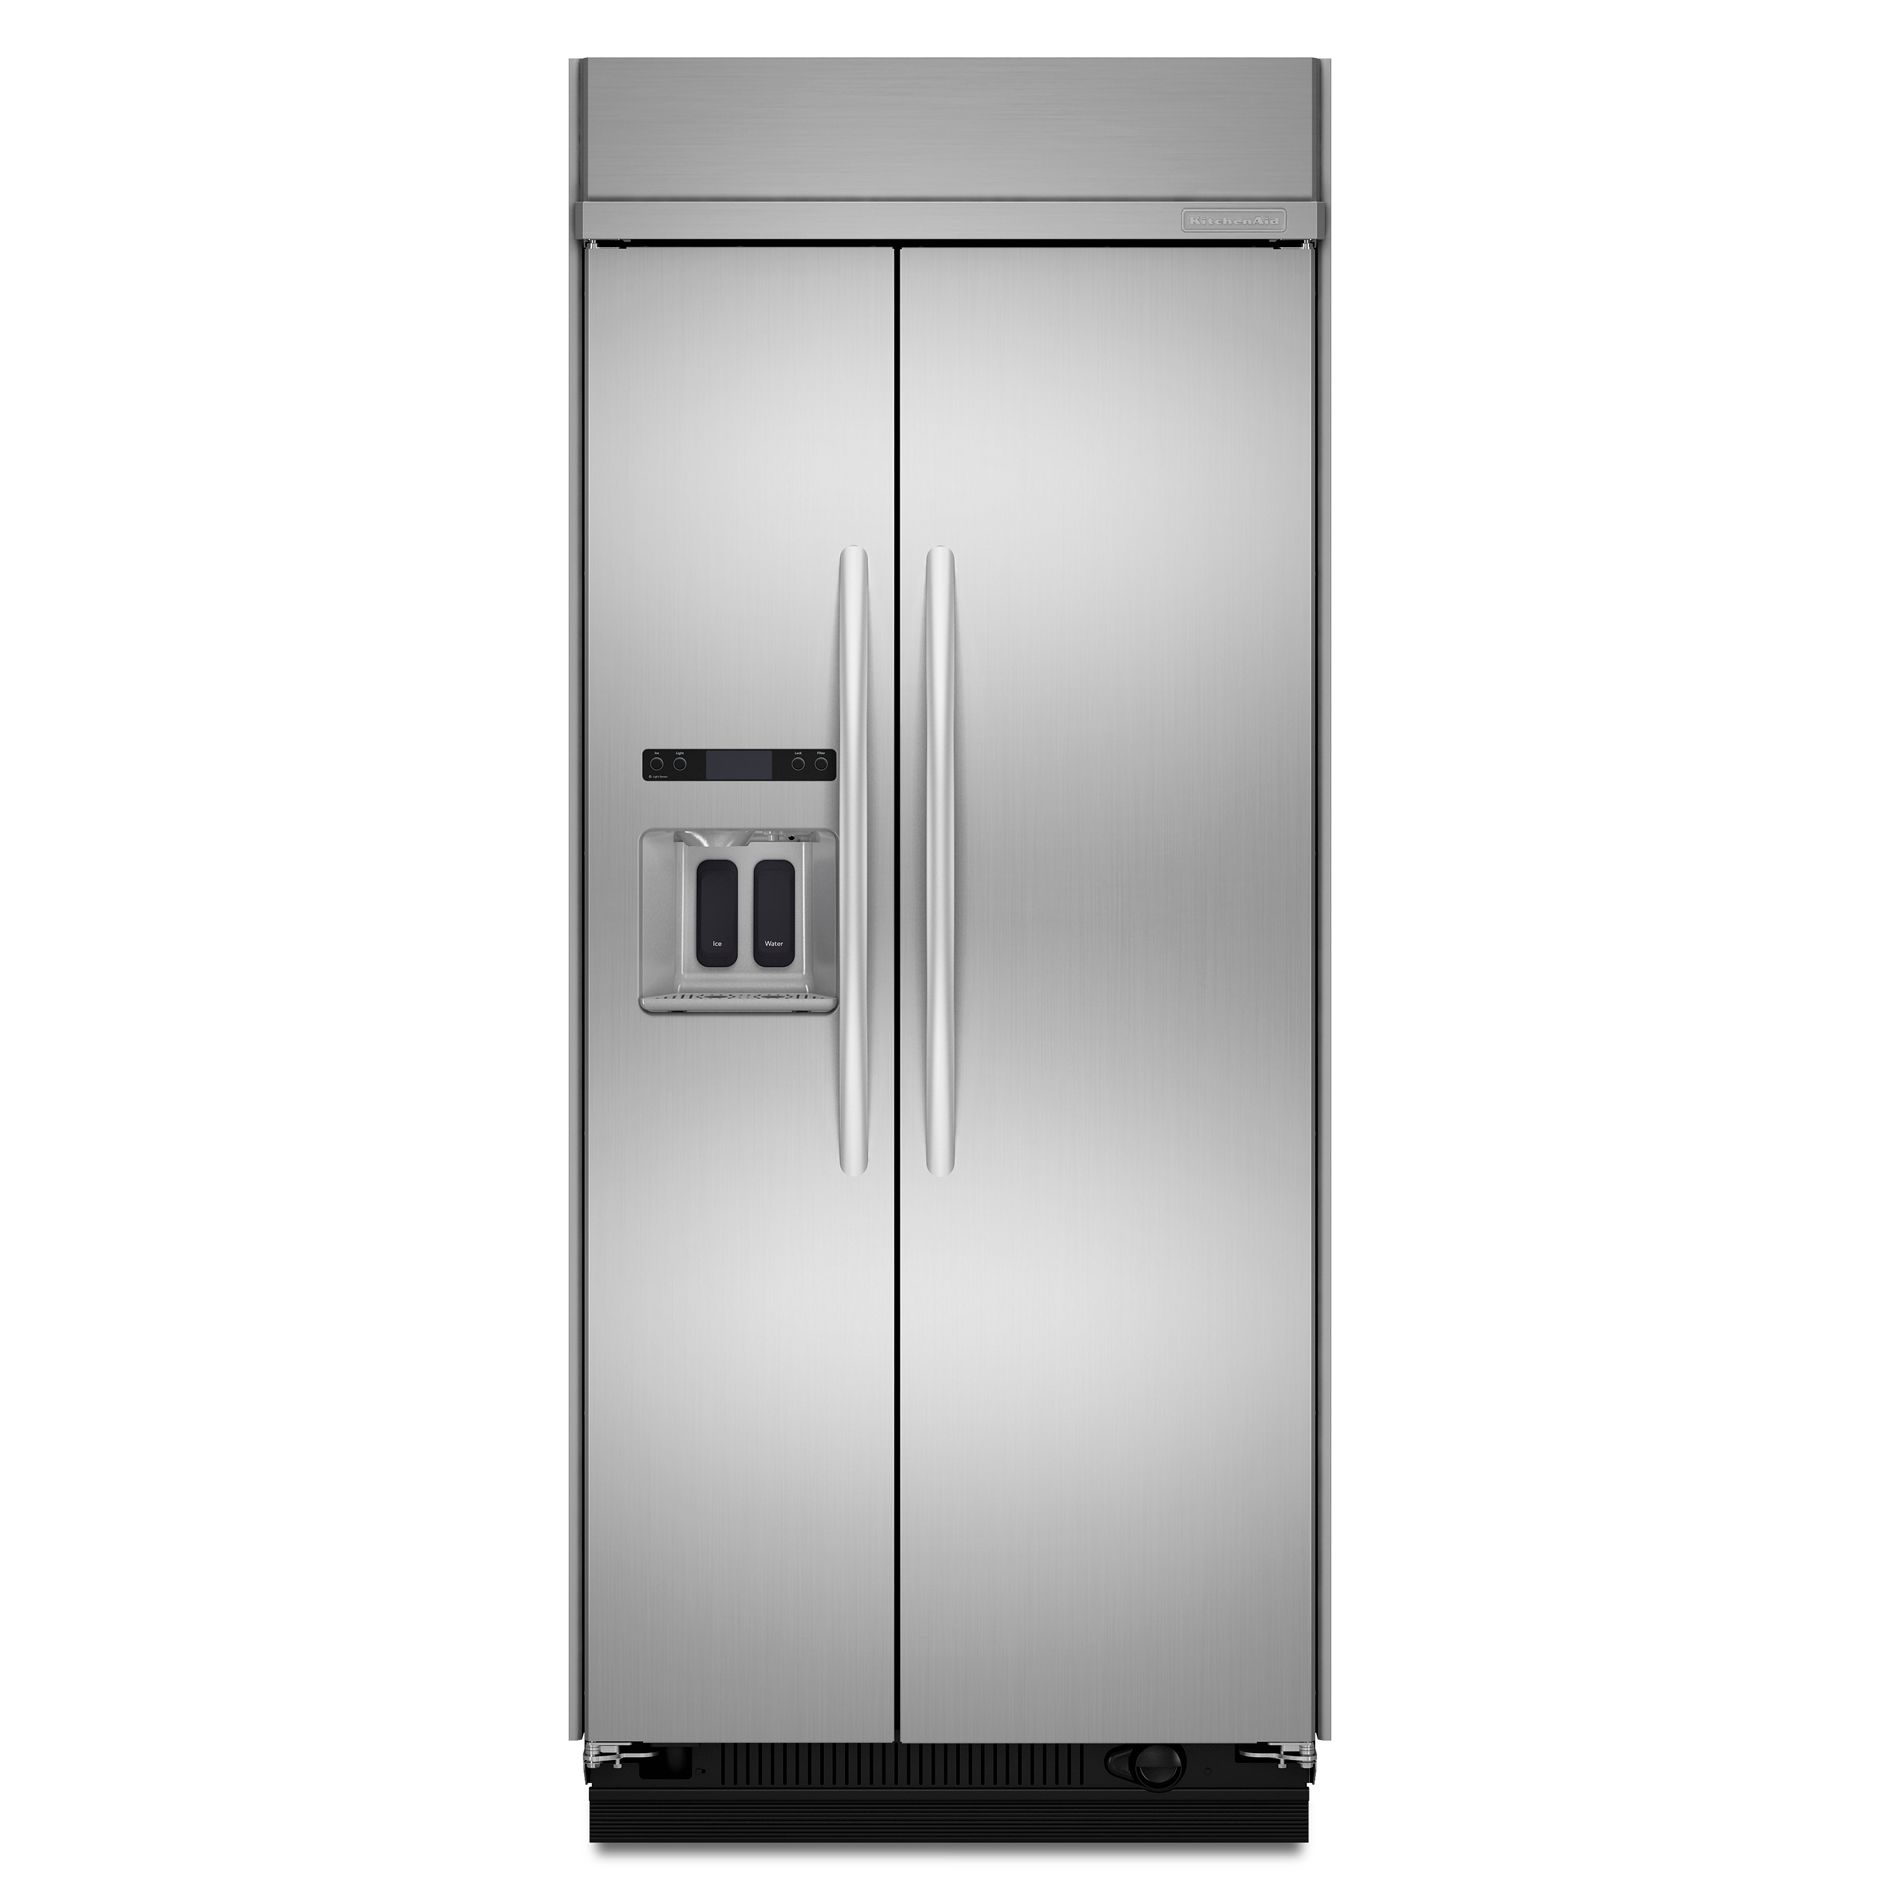 KitchenAid 20.9 cu. ft. Built-In Side-By-Side Refrigerator Stainless steel